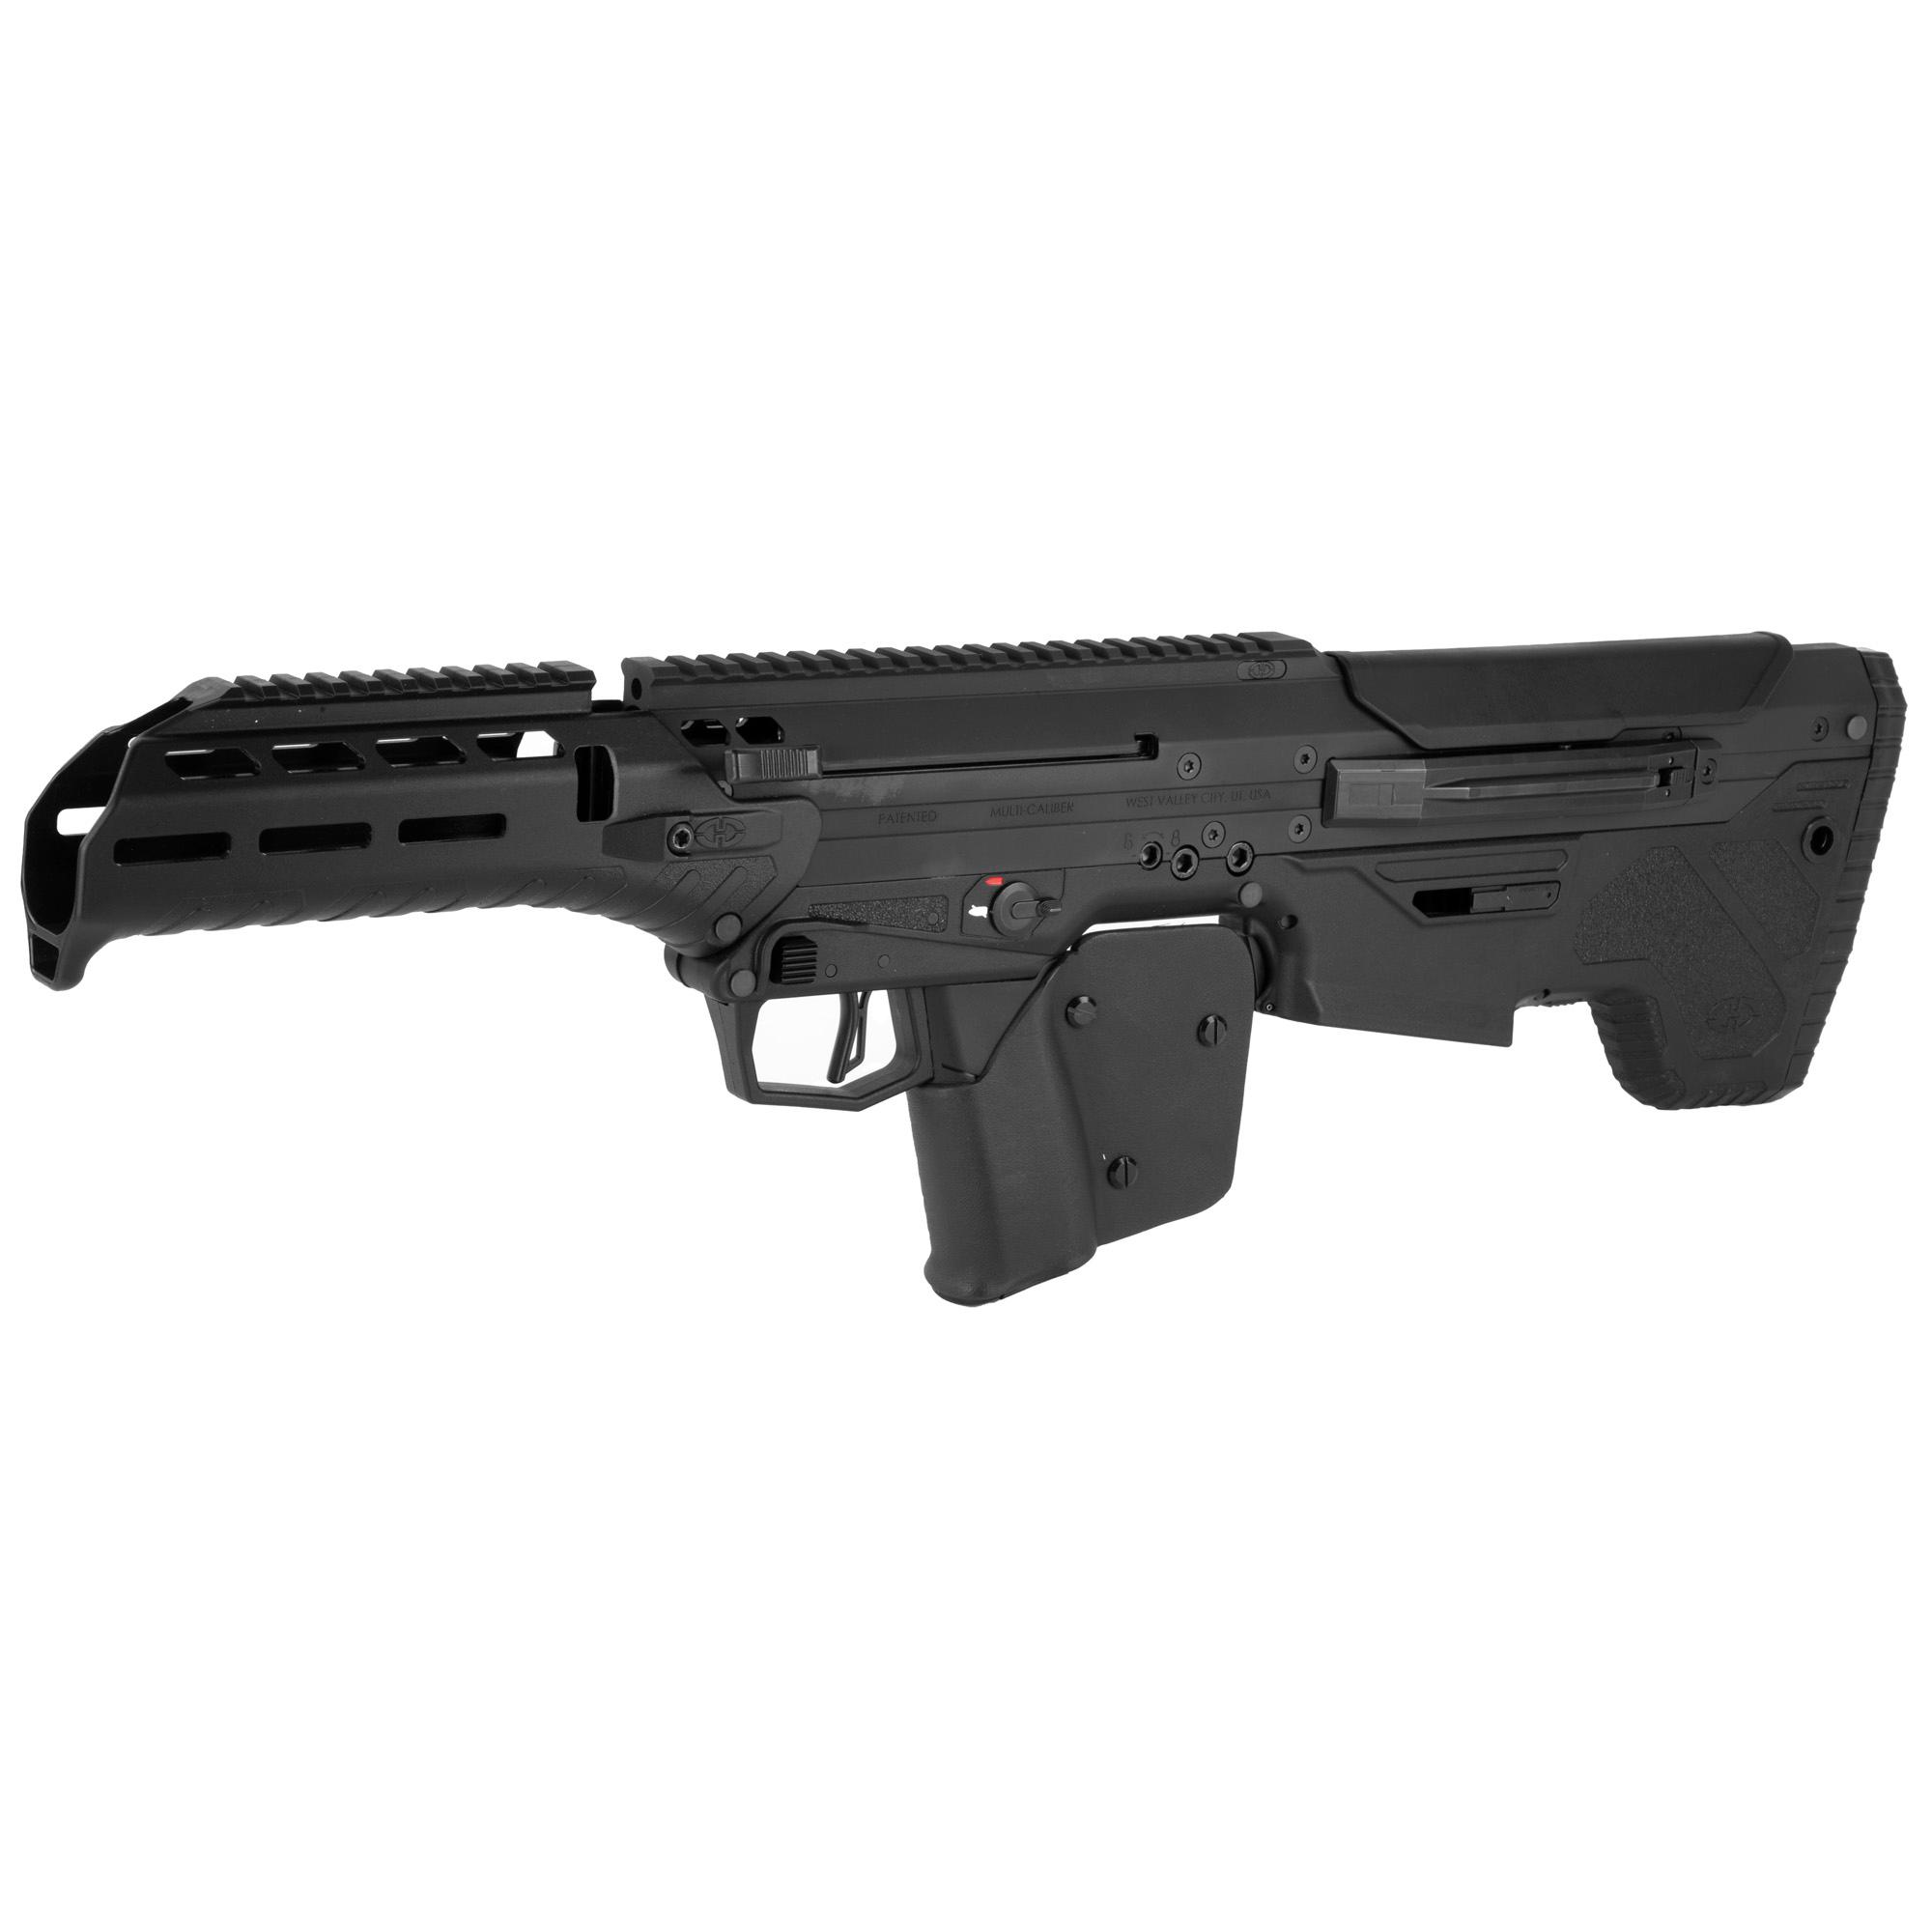 Long Guns DT MDRX CHASSIS FRWRD CA BLK image 3